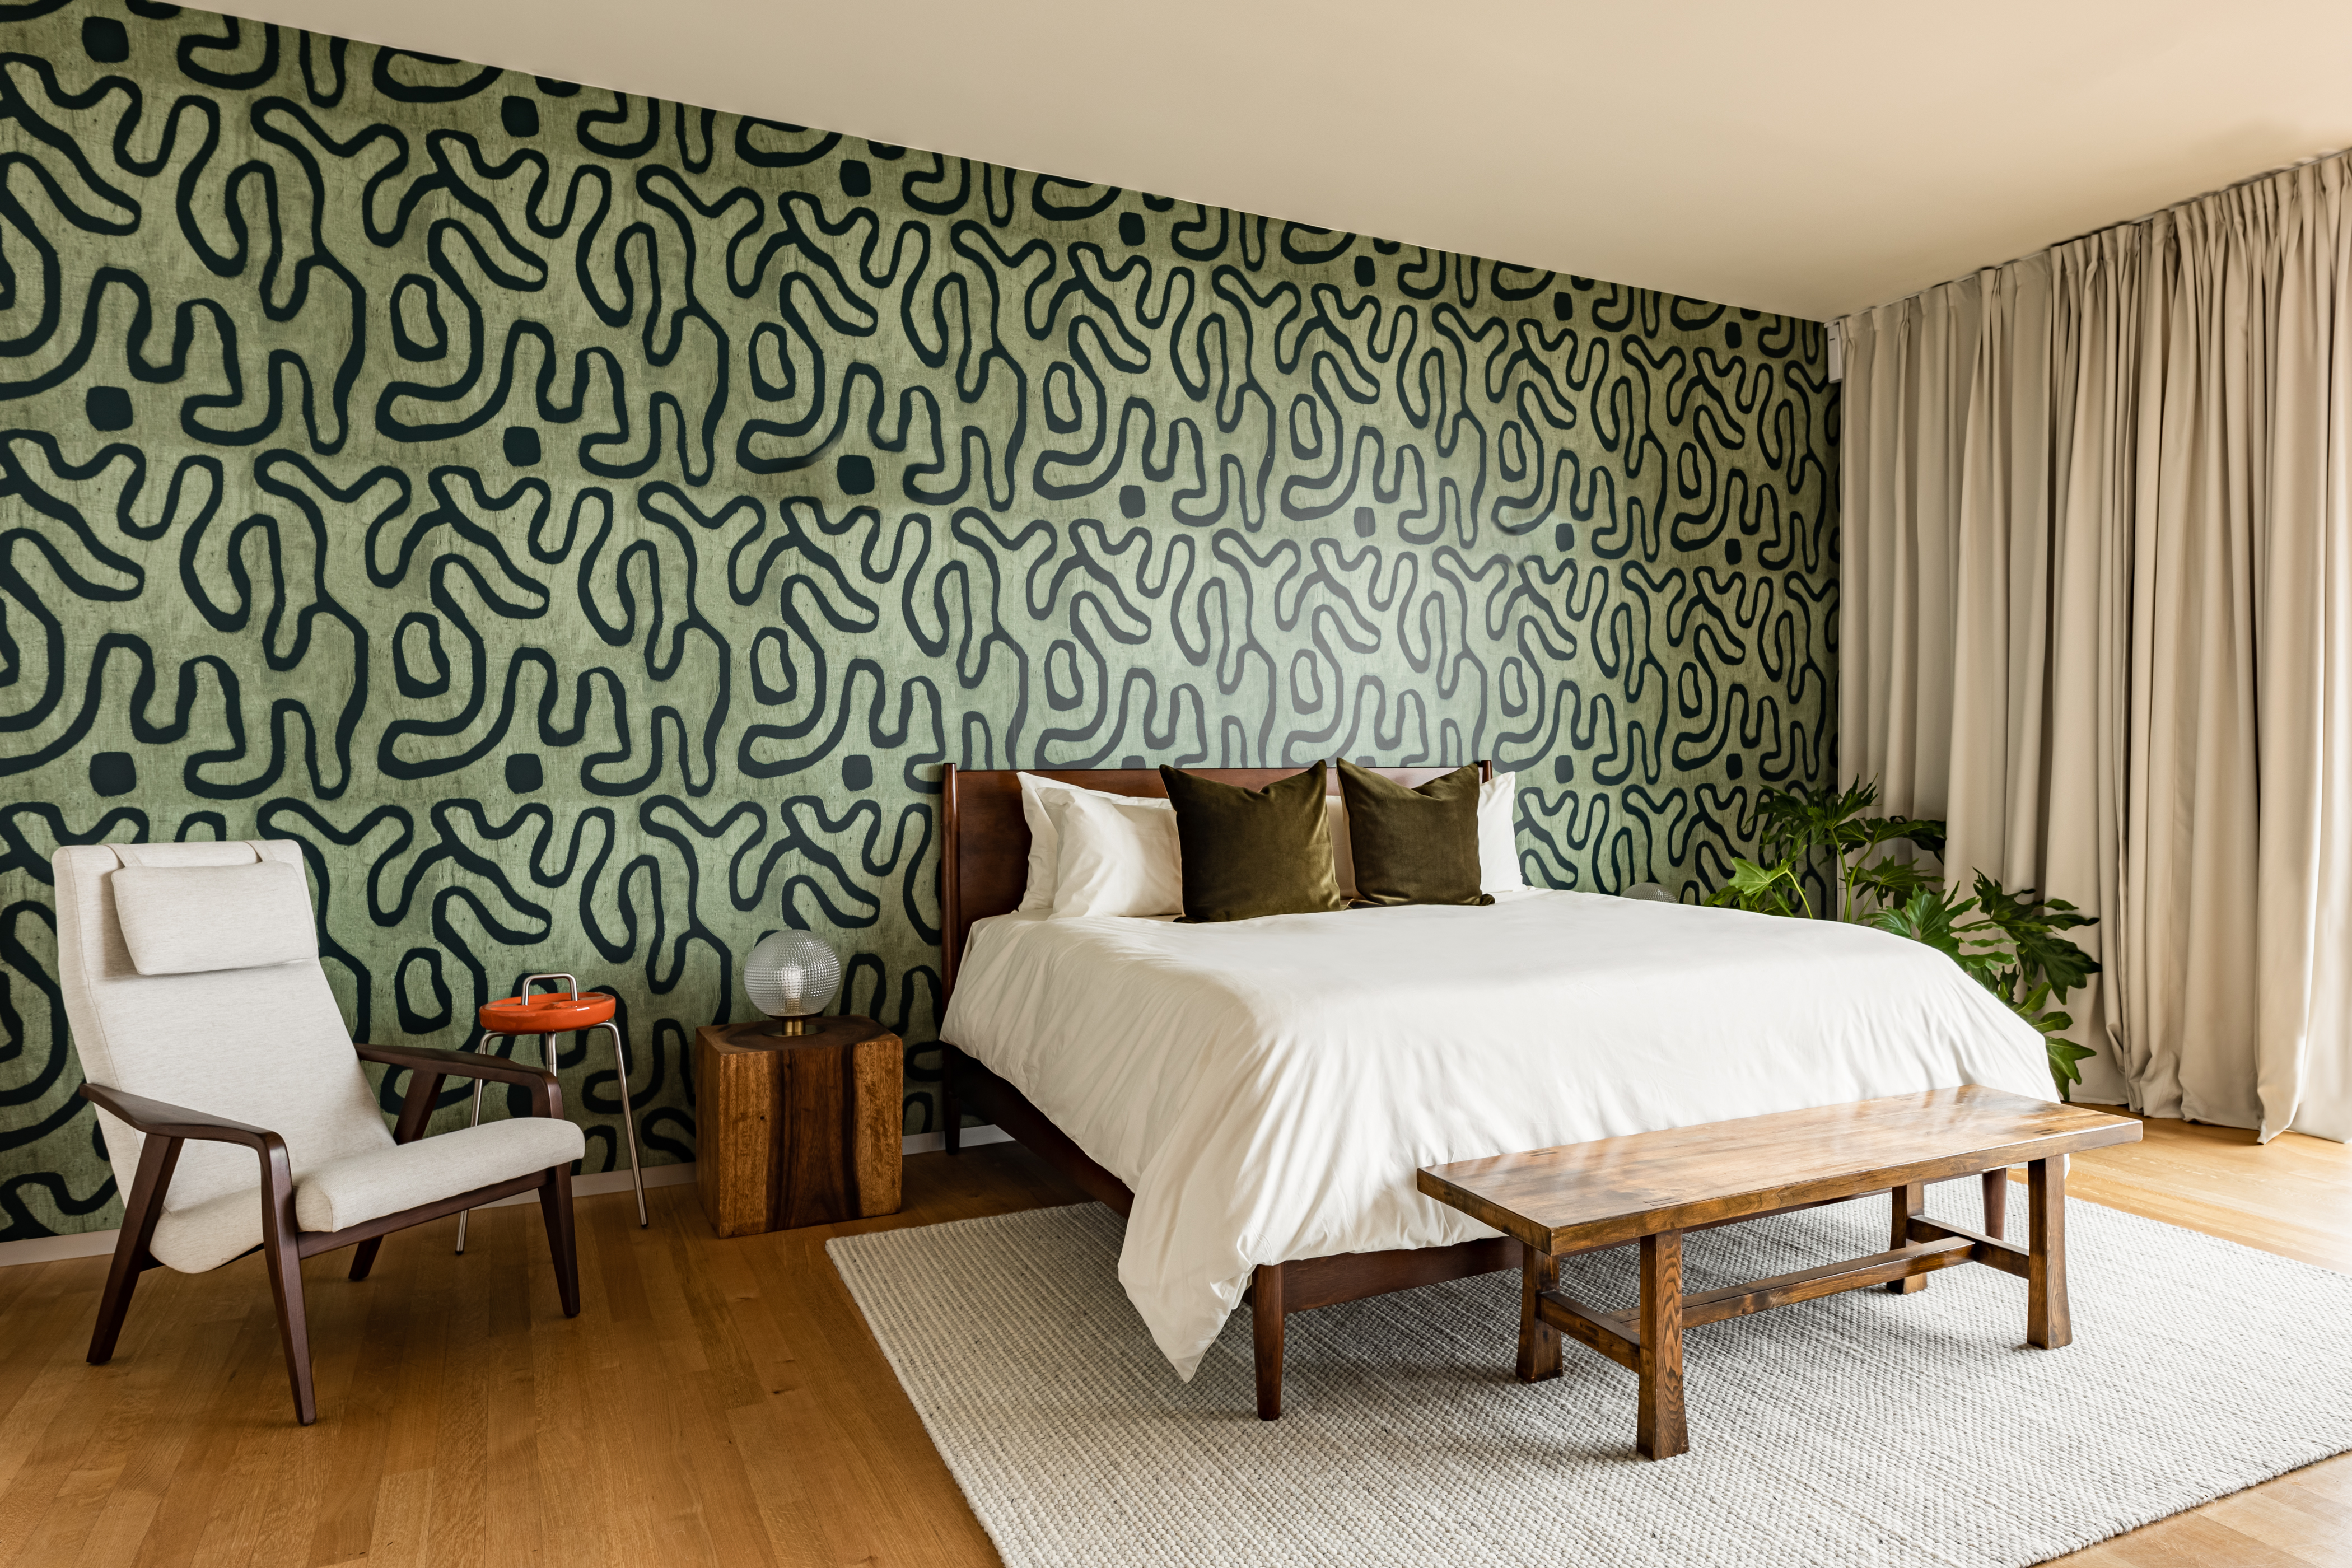 Houseplant home bedroom, which includes a large bed with white linens, a bench and side chair, with green wallpaper with abstract black designs on it.